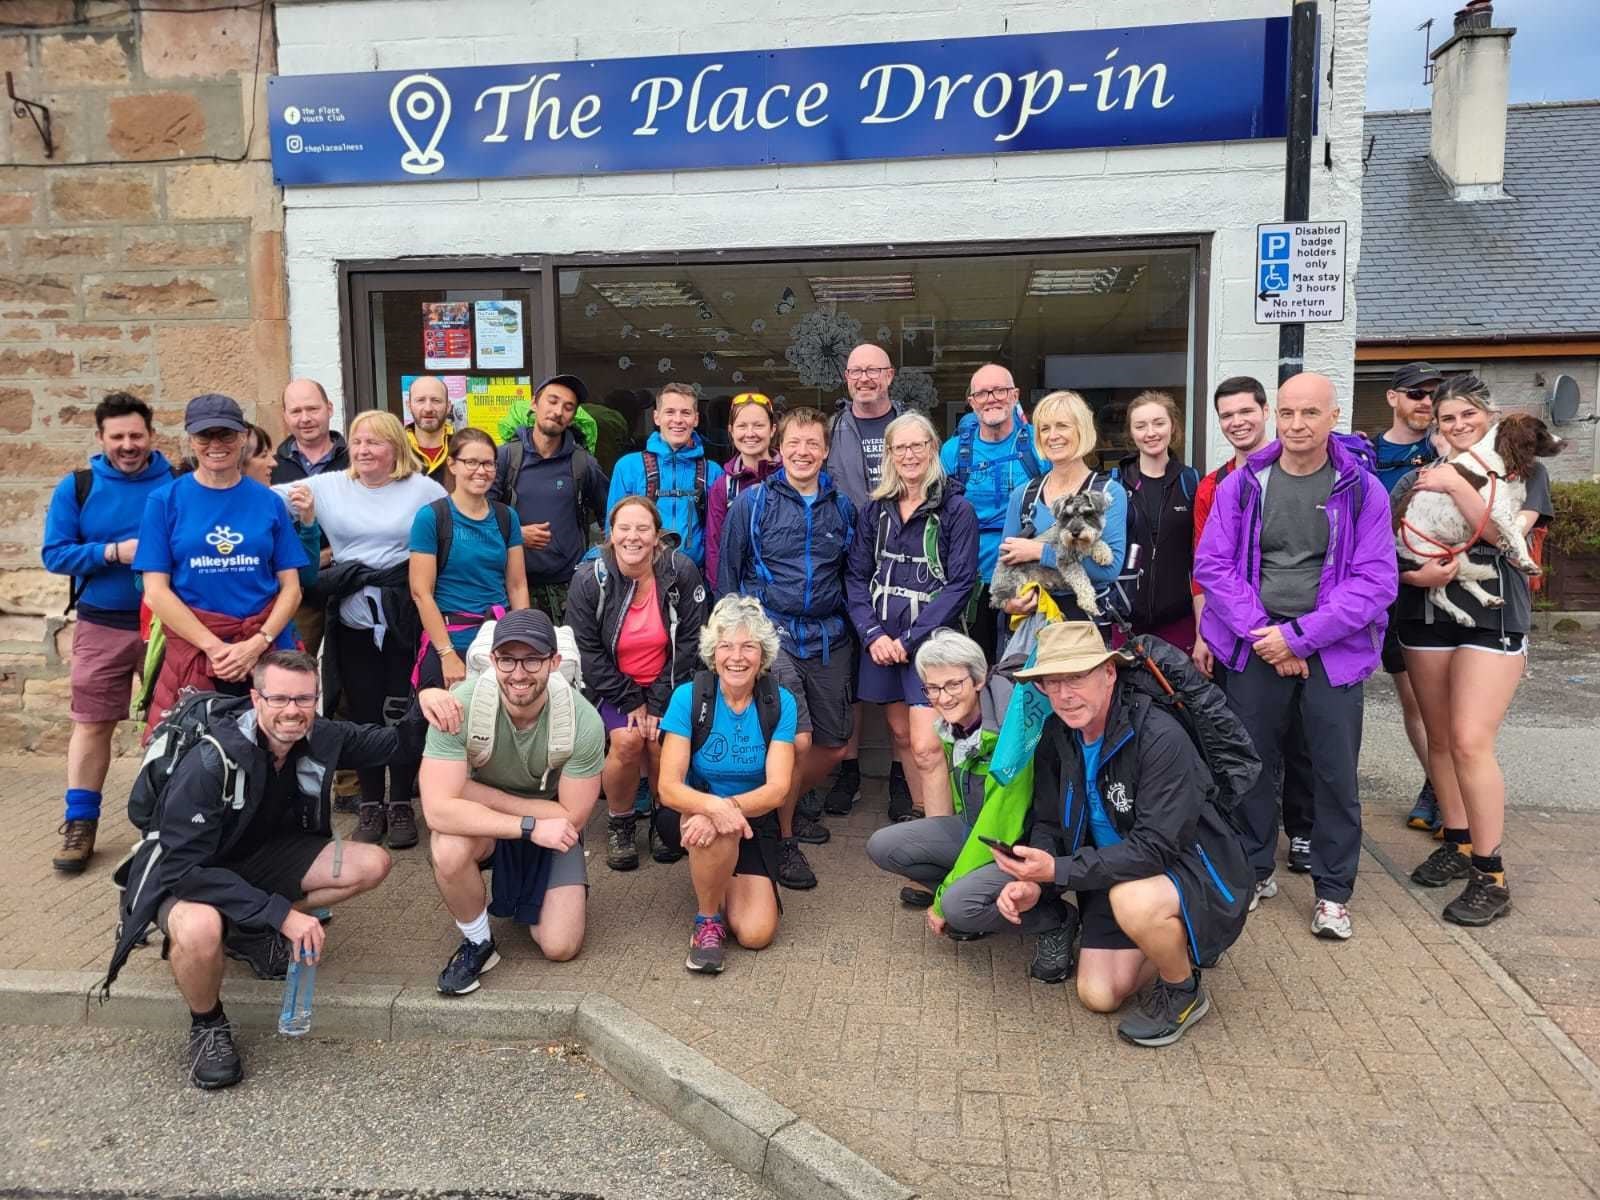 John Gibson of The Canmore Trust (crouching, front right) with Mikeysline and other supporters of mental health services outside The Place in Alness, where Mikeysline delivers support to the local community. John Gibson is featured in the latest episode of the podcast, Speaking of Suicide.